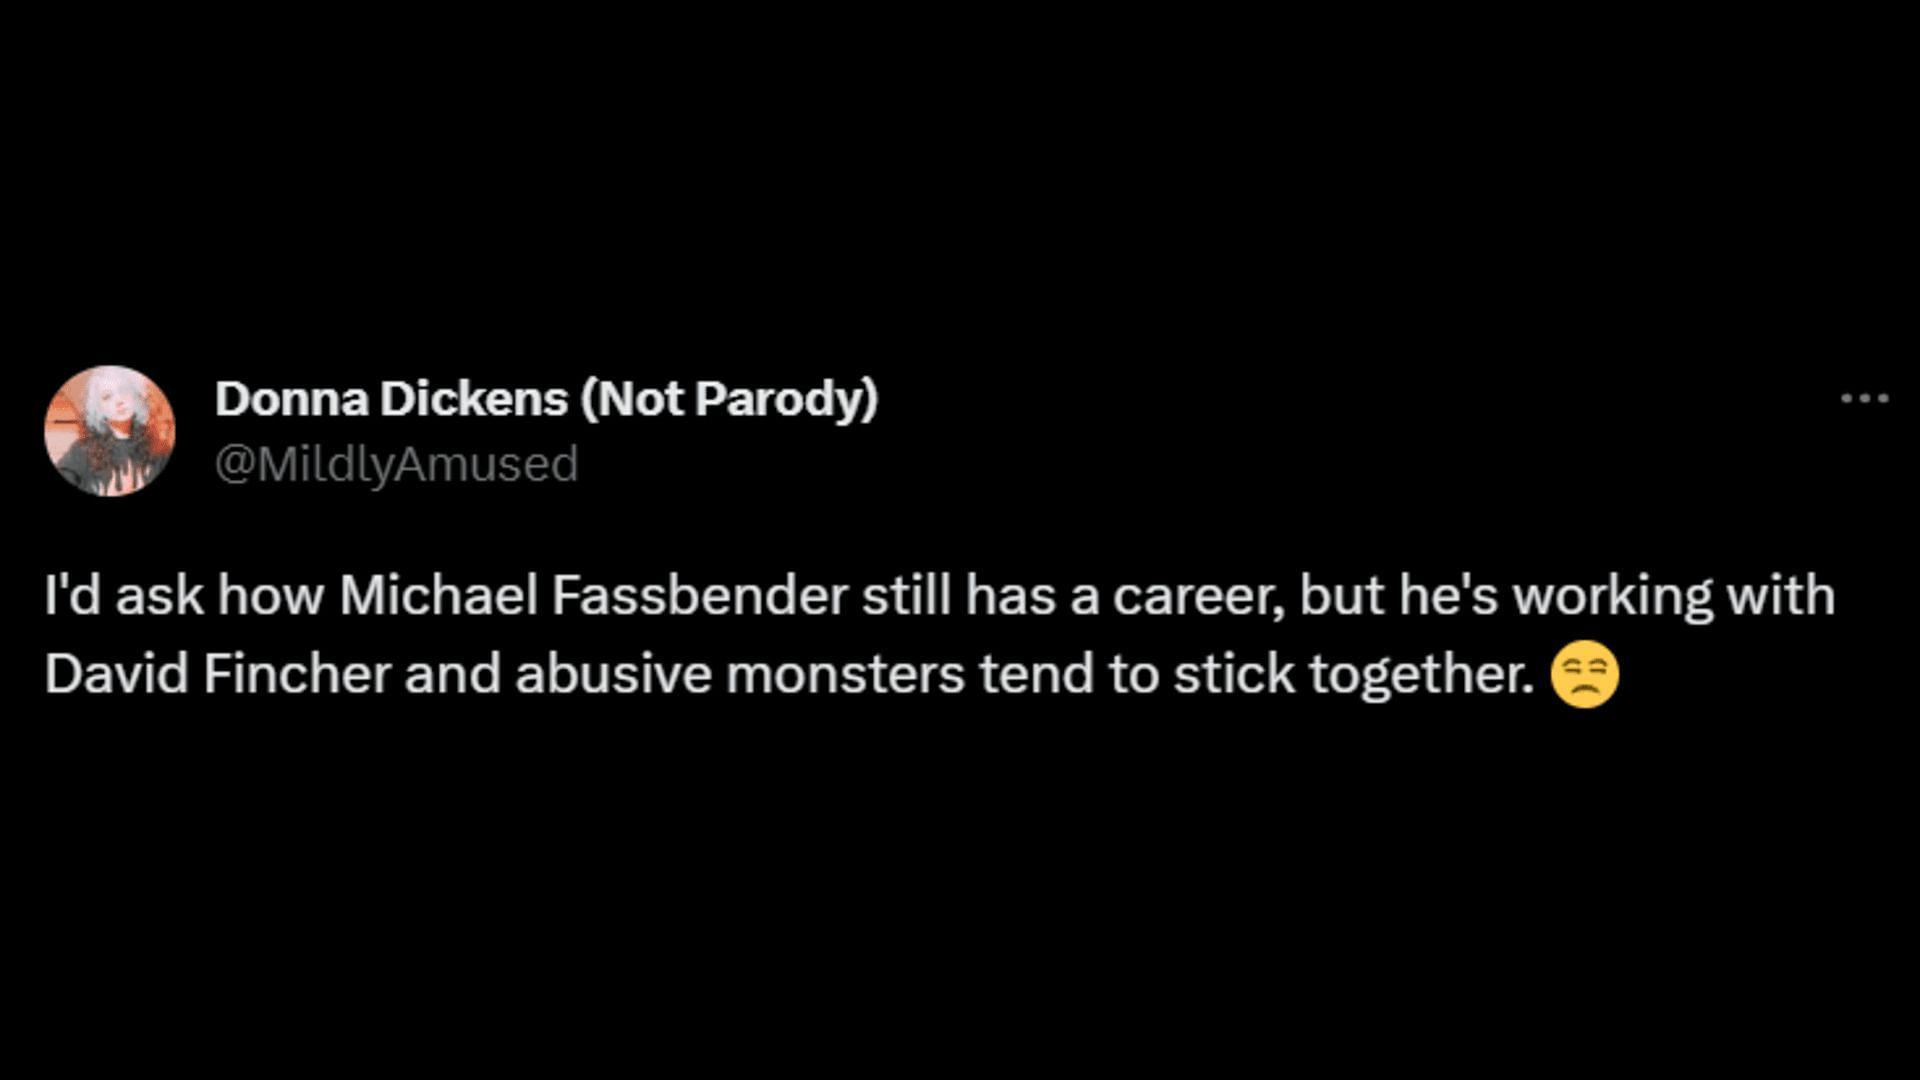 A netizen calls both Michael and David monsters. (Image via X/Donna Dickens (Not Parody))